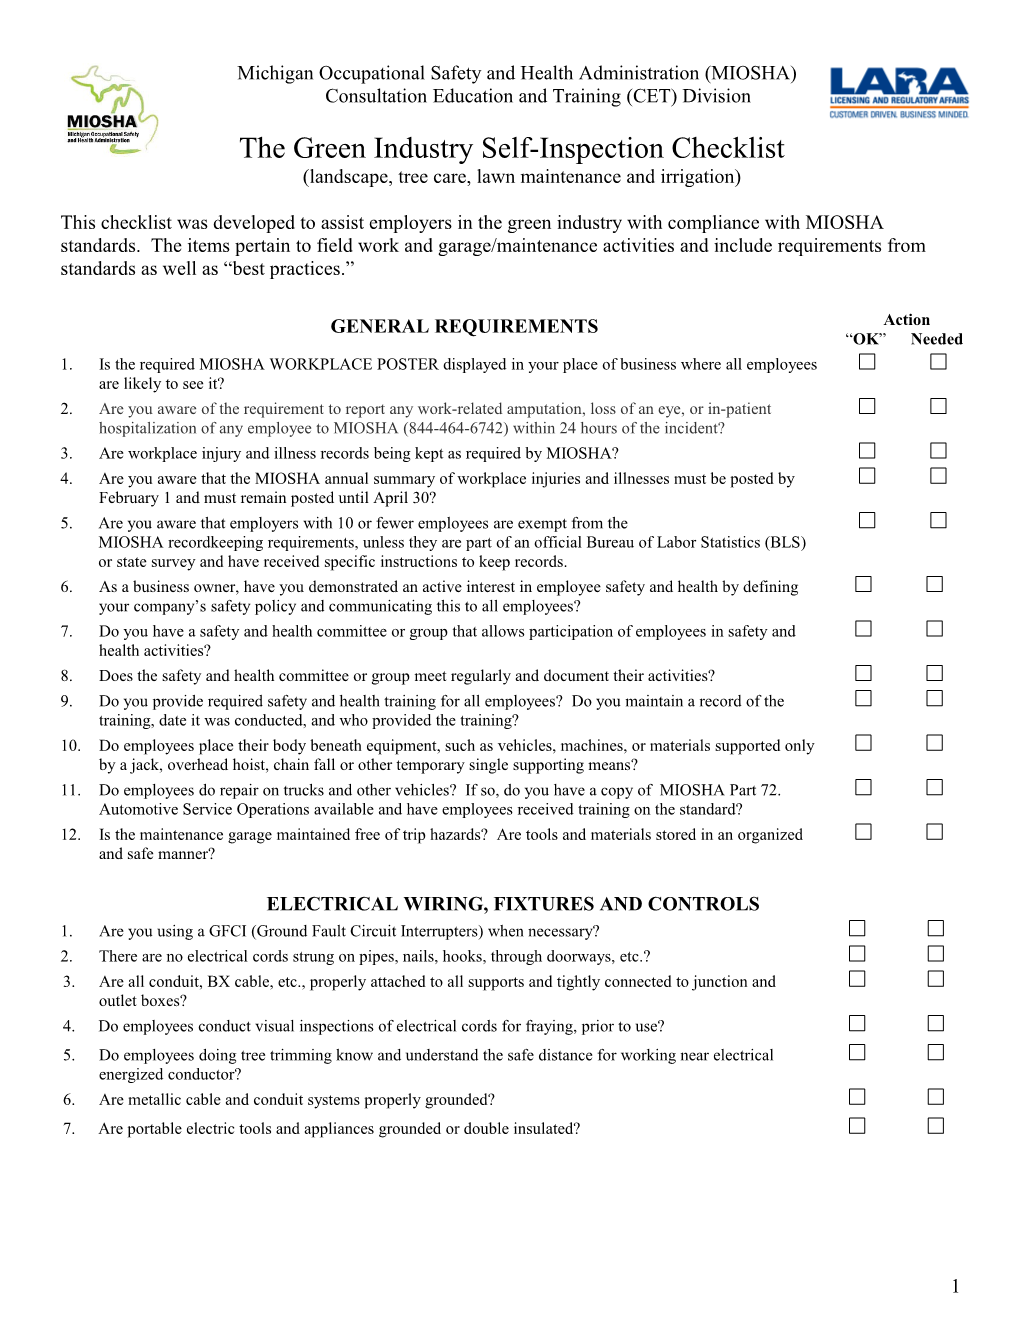 The Green Industry Self-Inspection Checklist